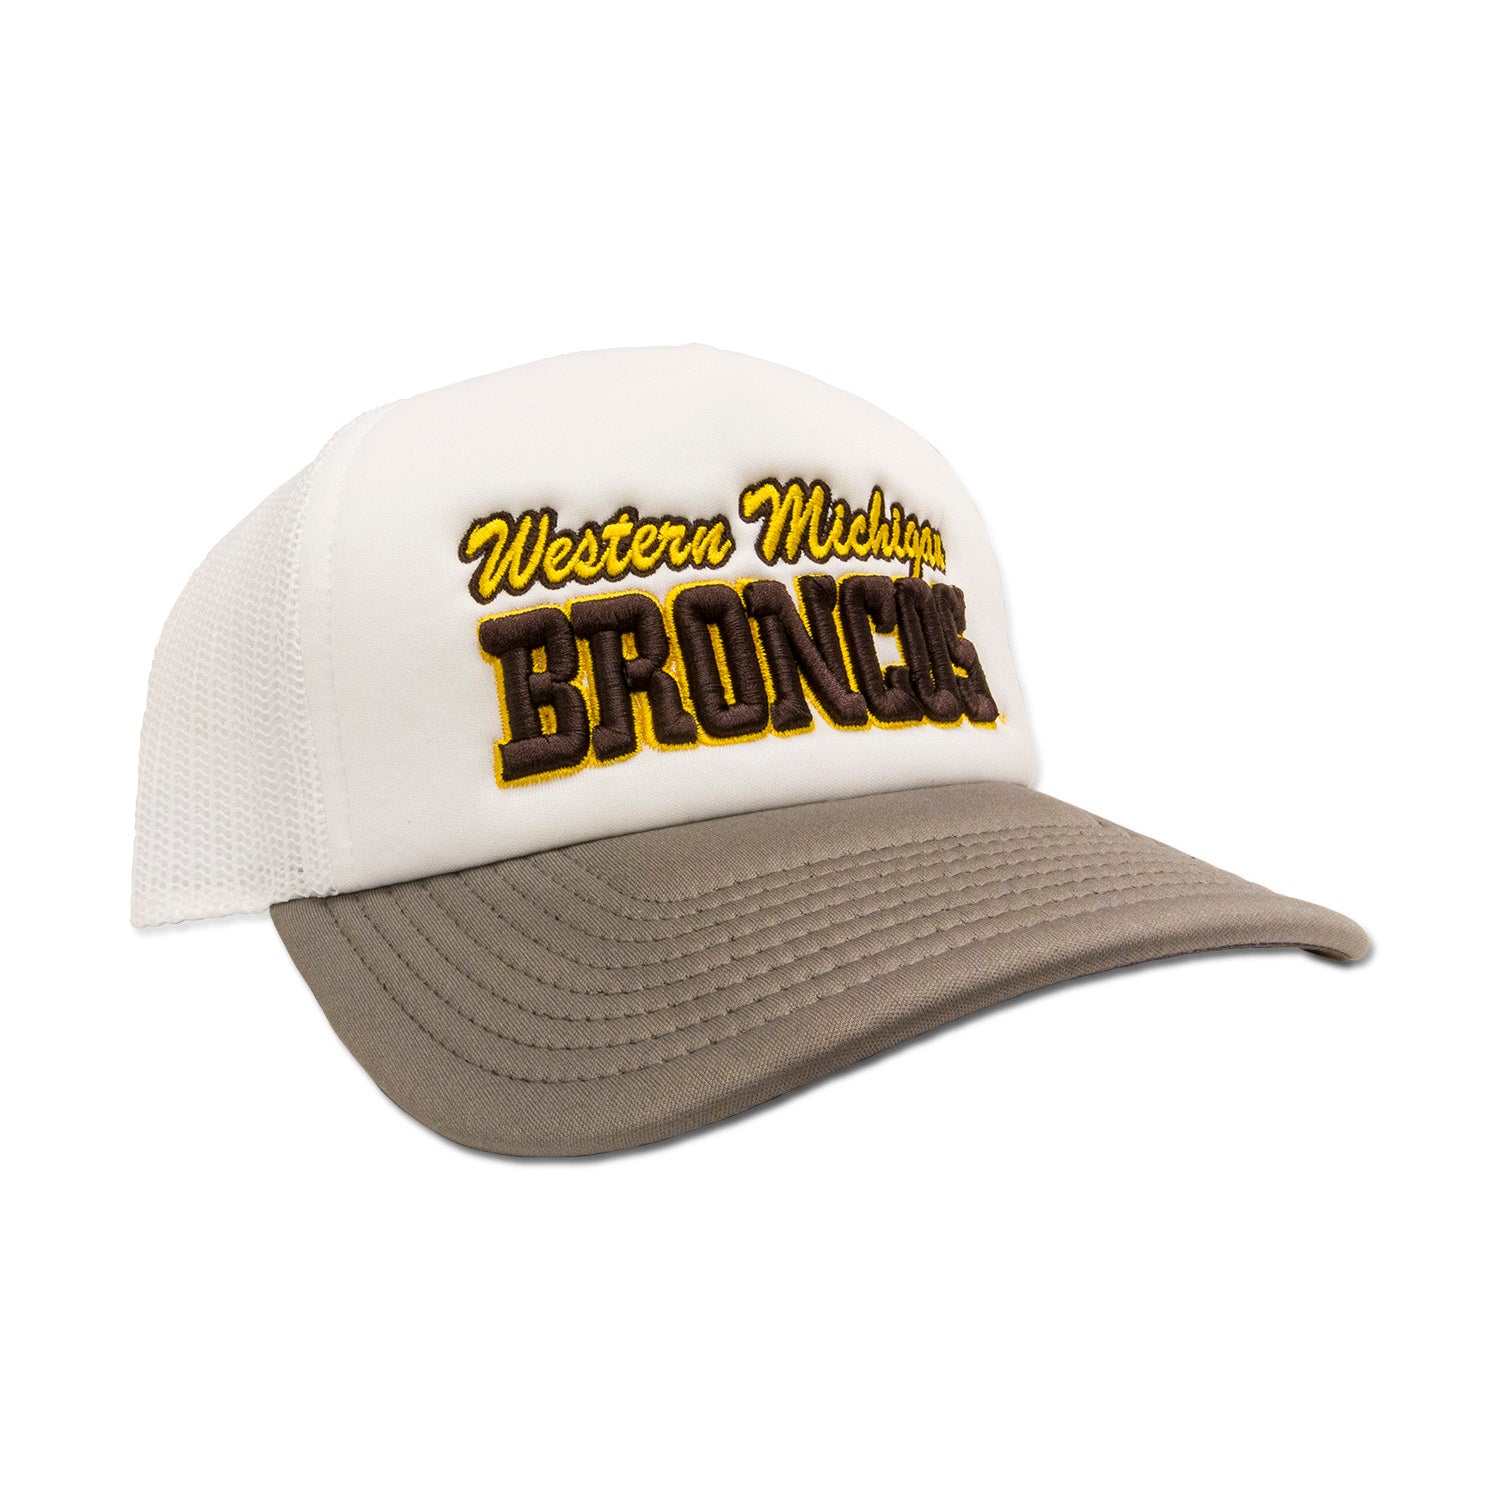 youth bronco hat